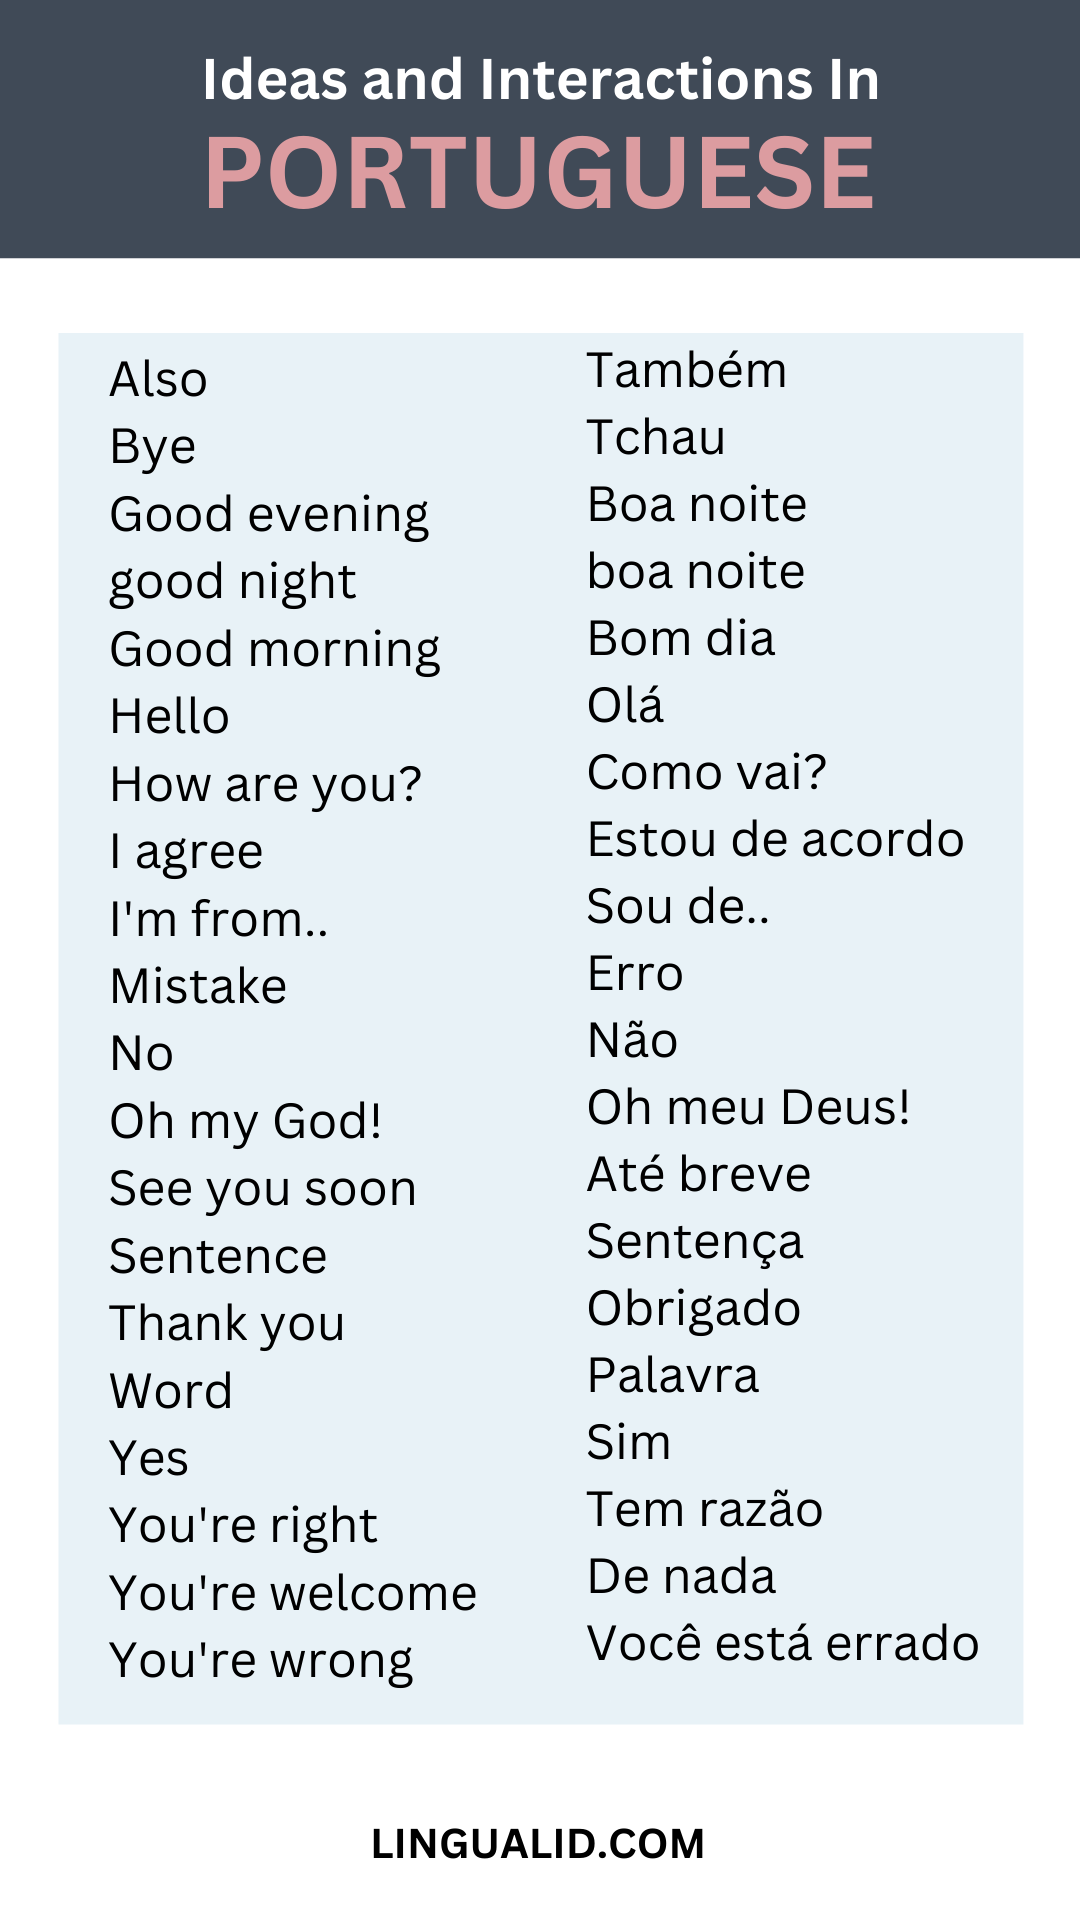 ideas and interactions in portuguese